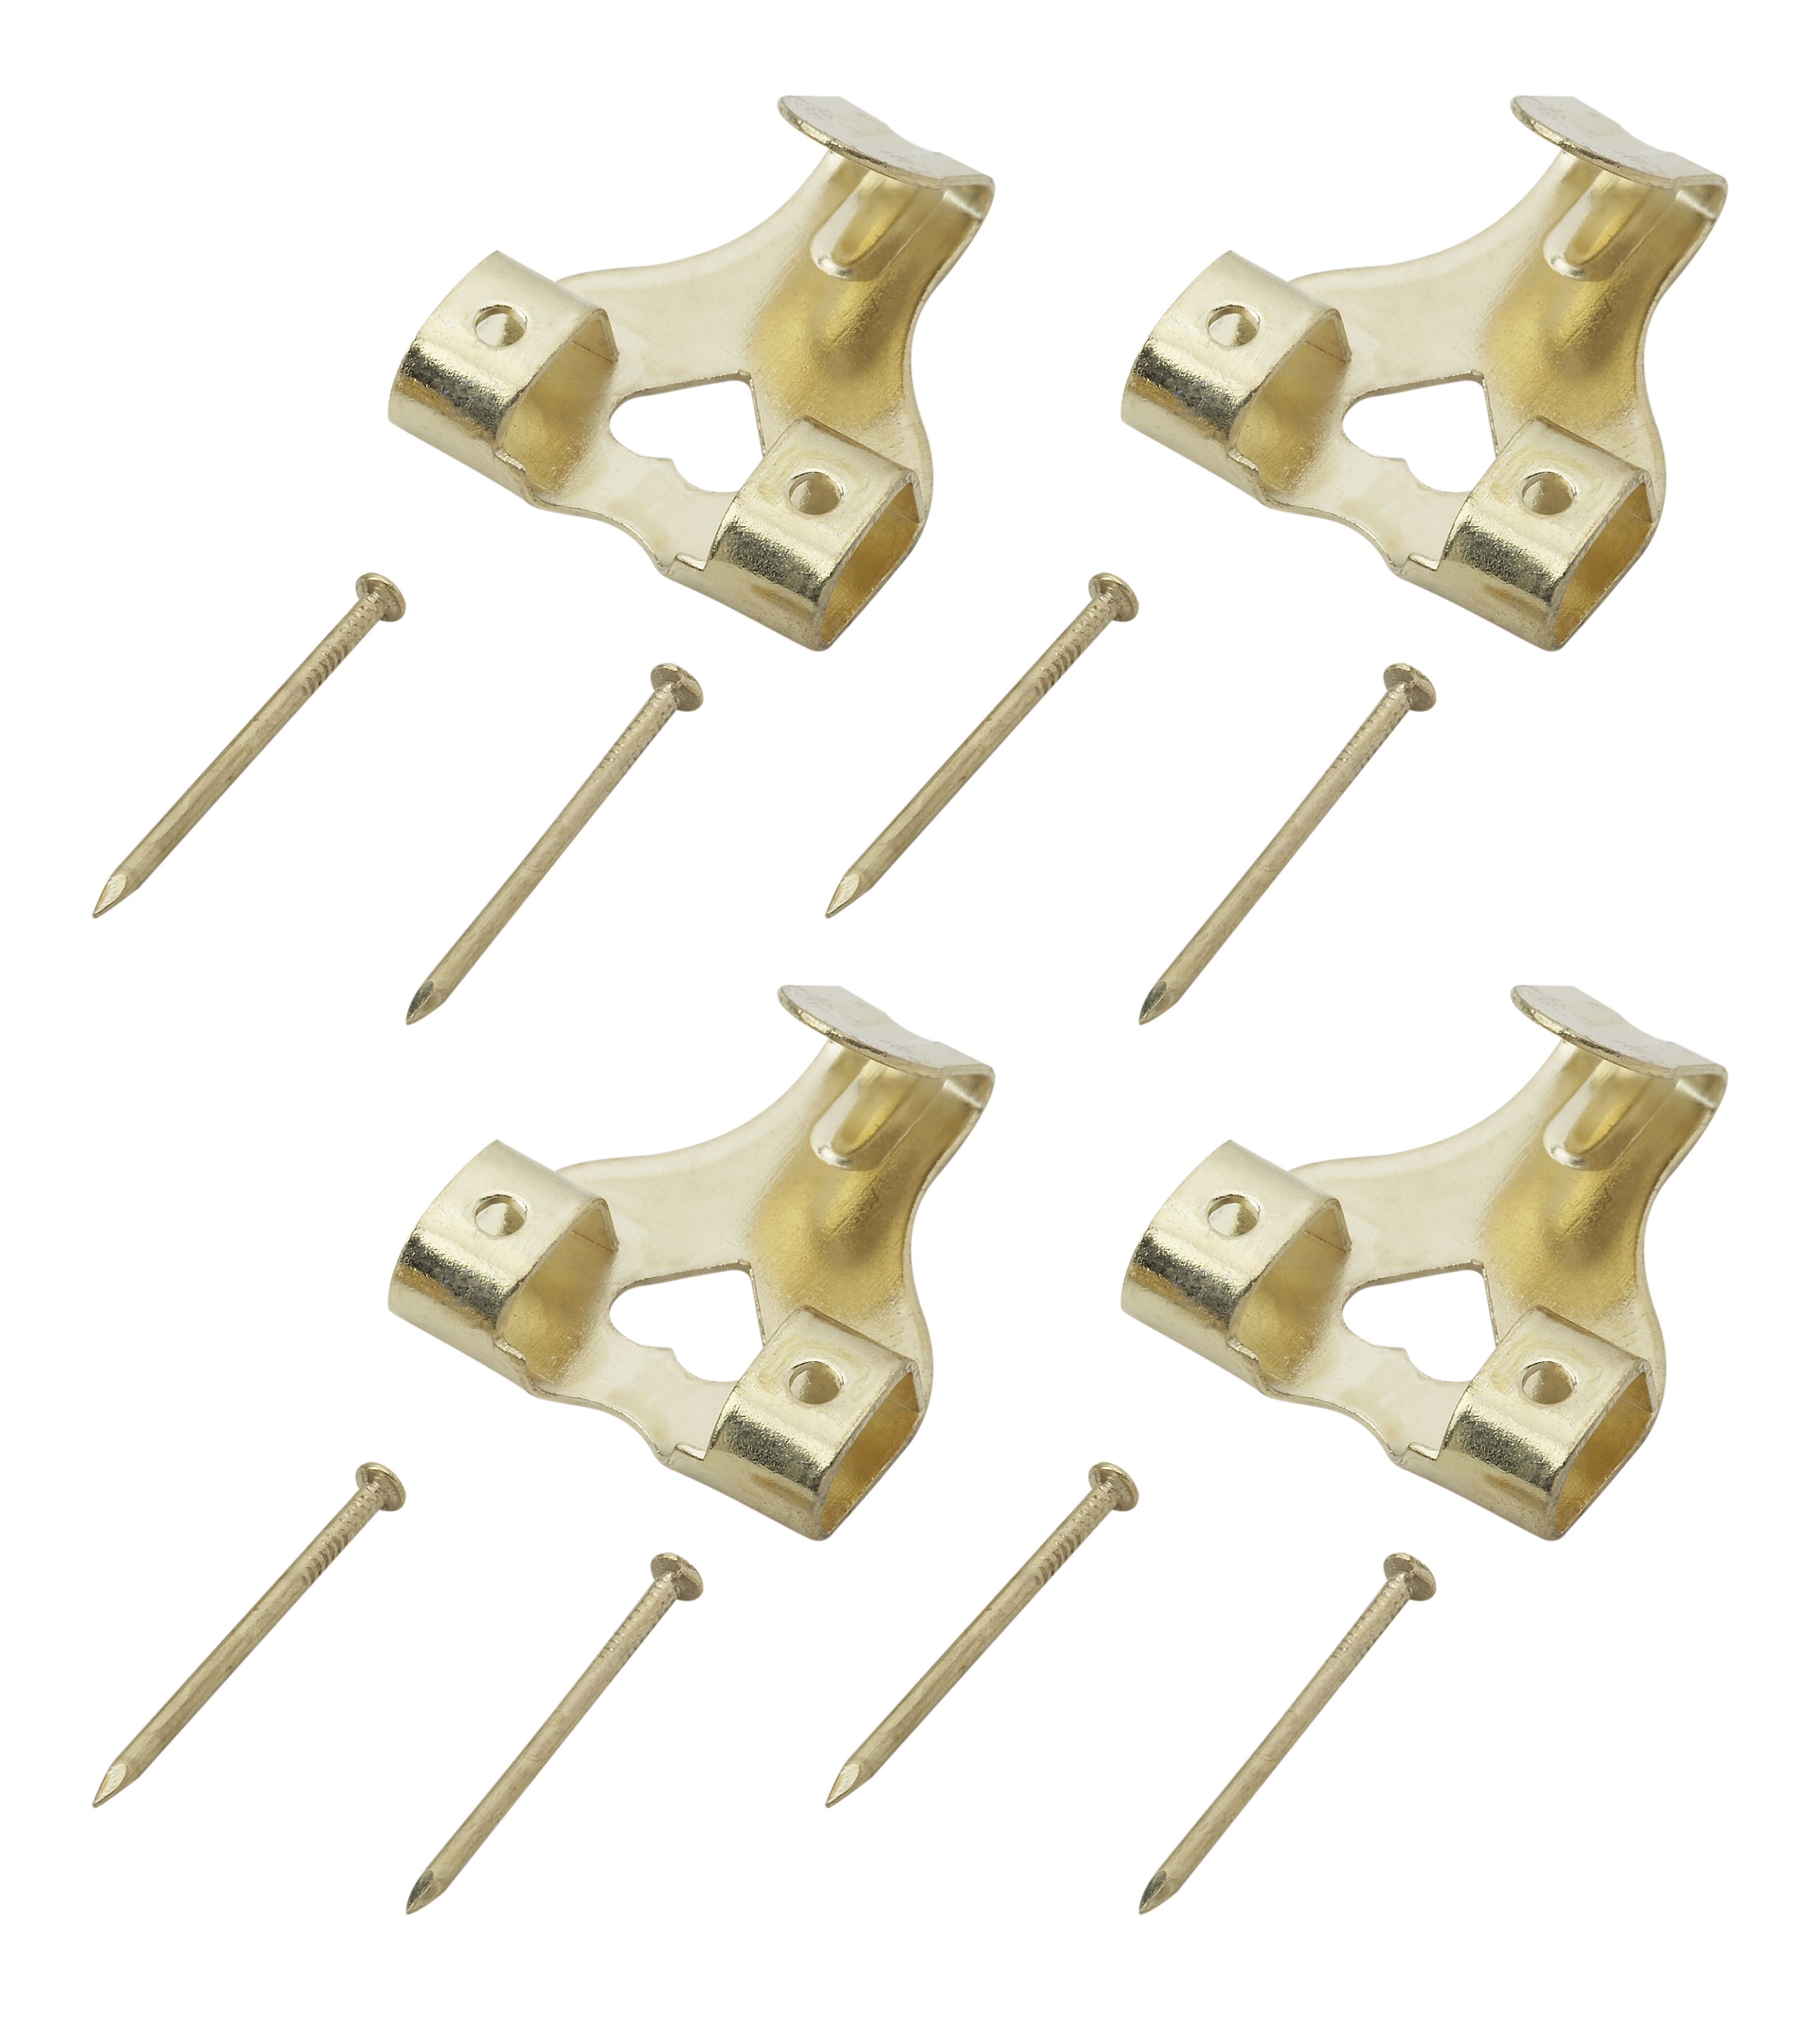 No.2 Single Picture Hanging Hooks - Single - Electro Brass Qty TIMpac 12 -  Screws & Fasteners